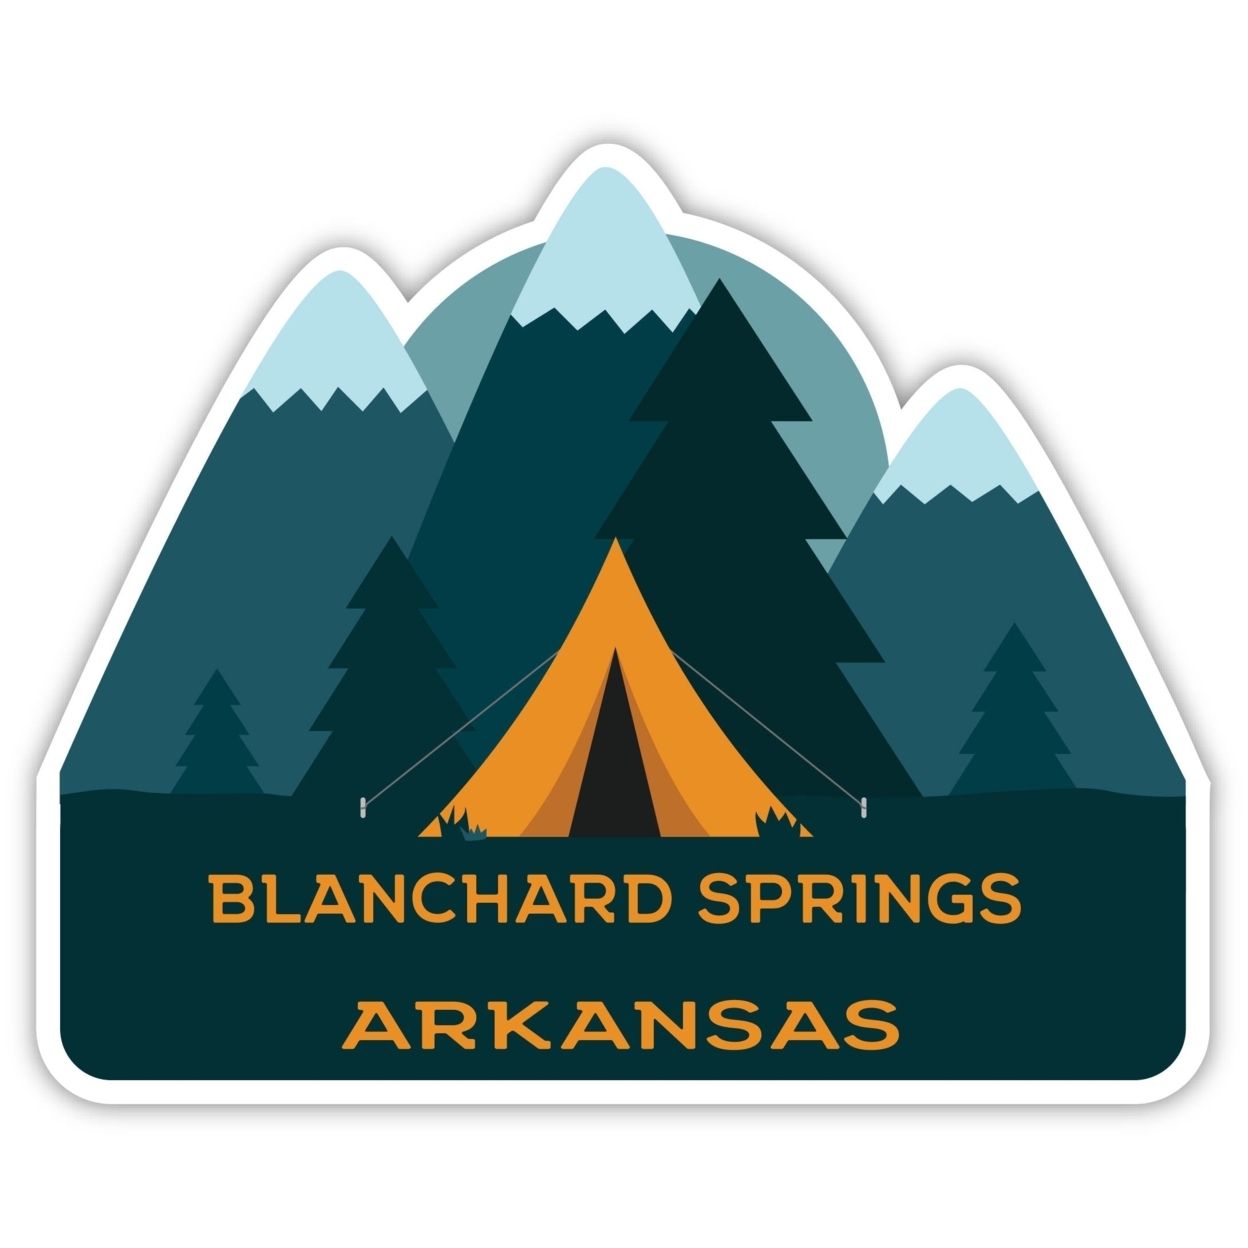 Blanchard Springs Arkansas Souvenir Decorative Stickers (Choose Theme And Size) - 4-Pack, 8-Inch, Tent